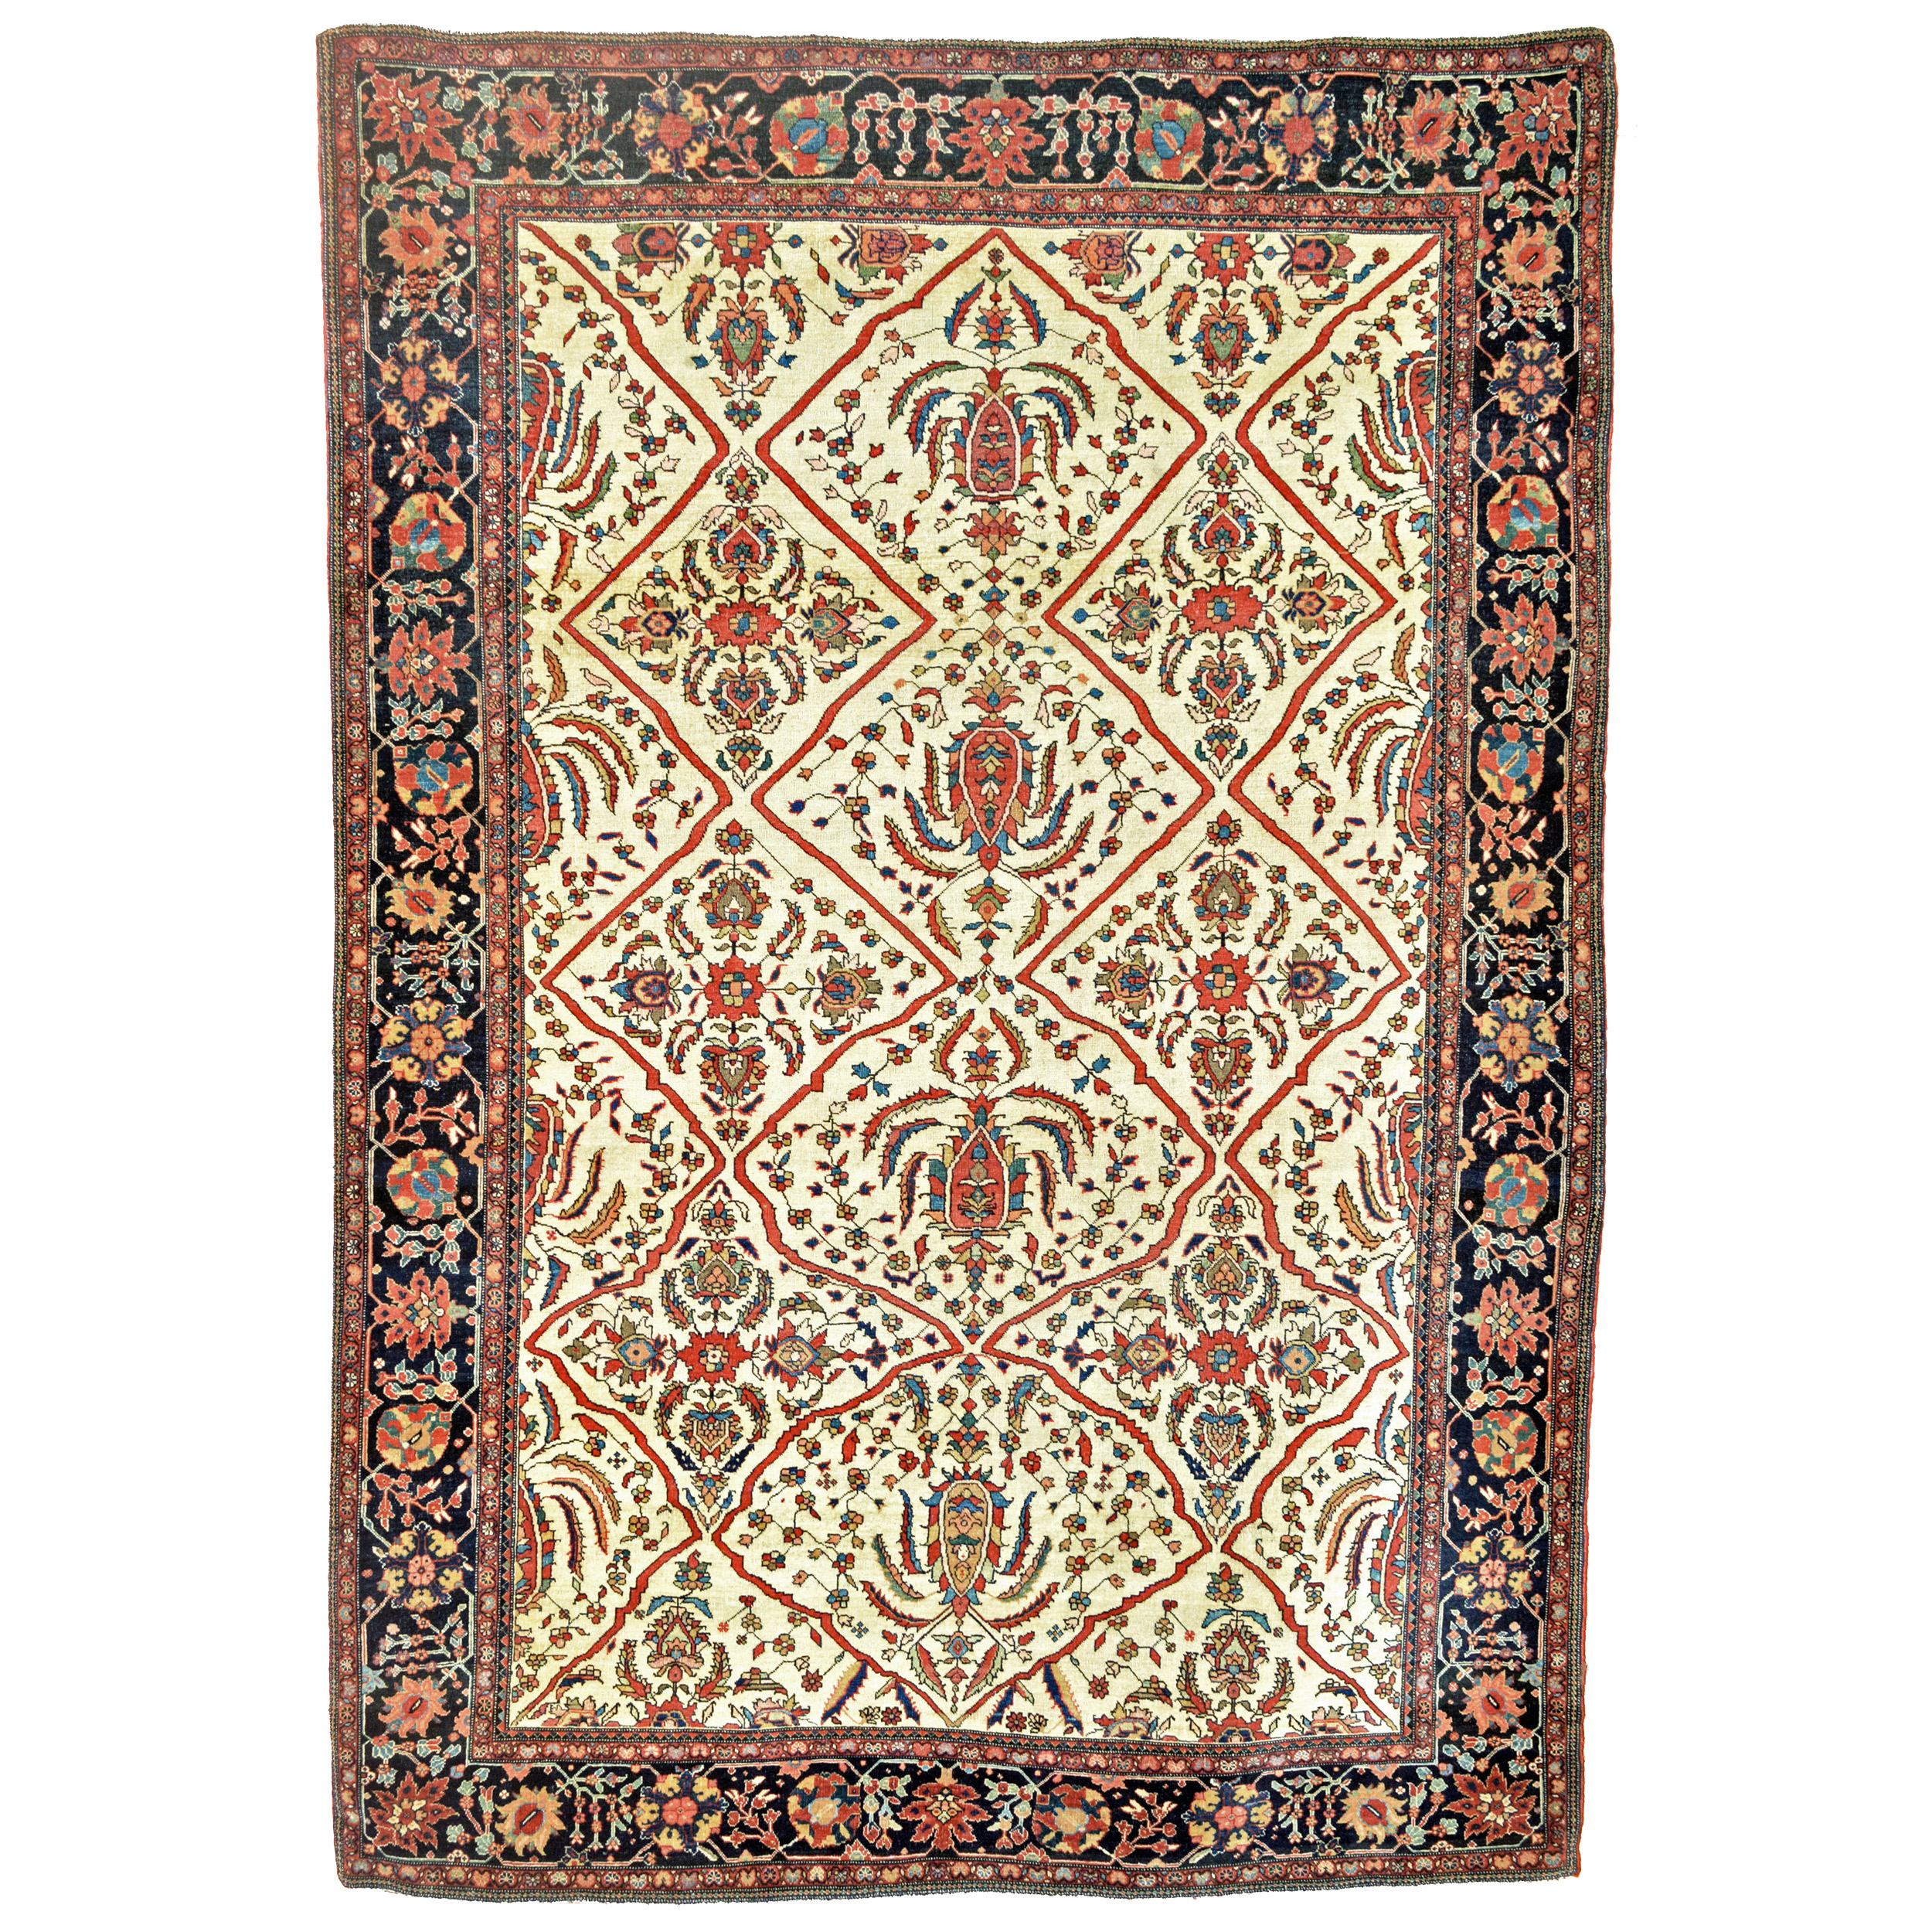 Douglas Stock Gallery, Antique Oriental rugs Boston,MA area. From our Antique Oriental Rug Research Archives, this is an important antique Persian Fereghan Sarouk rug with a lattice style design with palmettes, leaves and flowers on an ivory field, central Persia, circa 1880